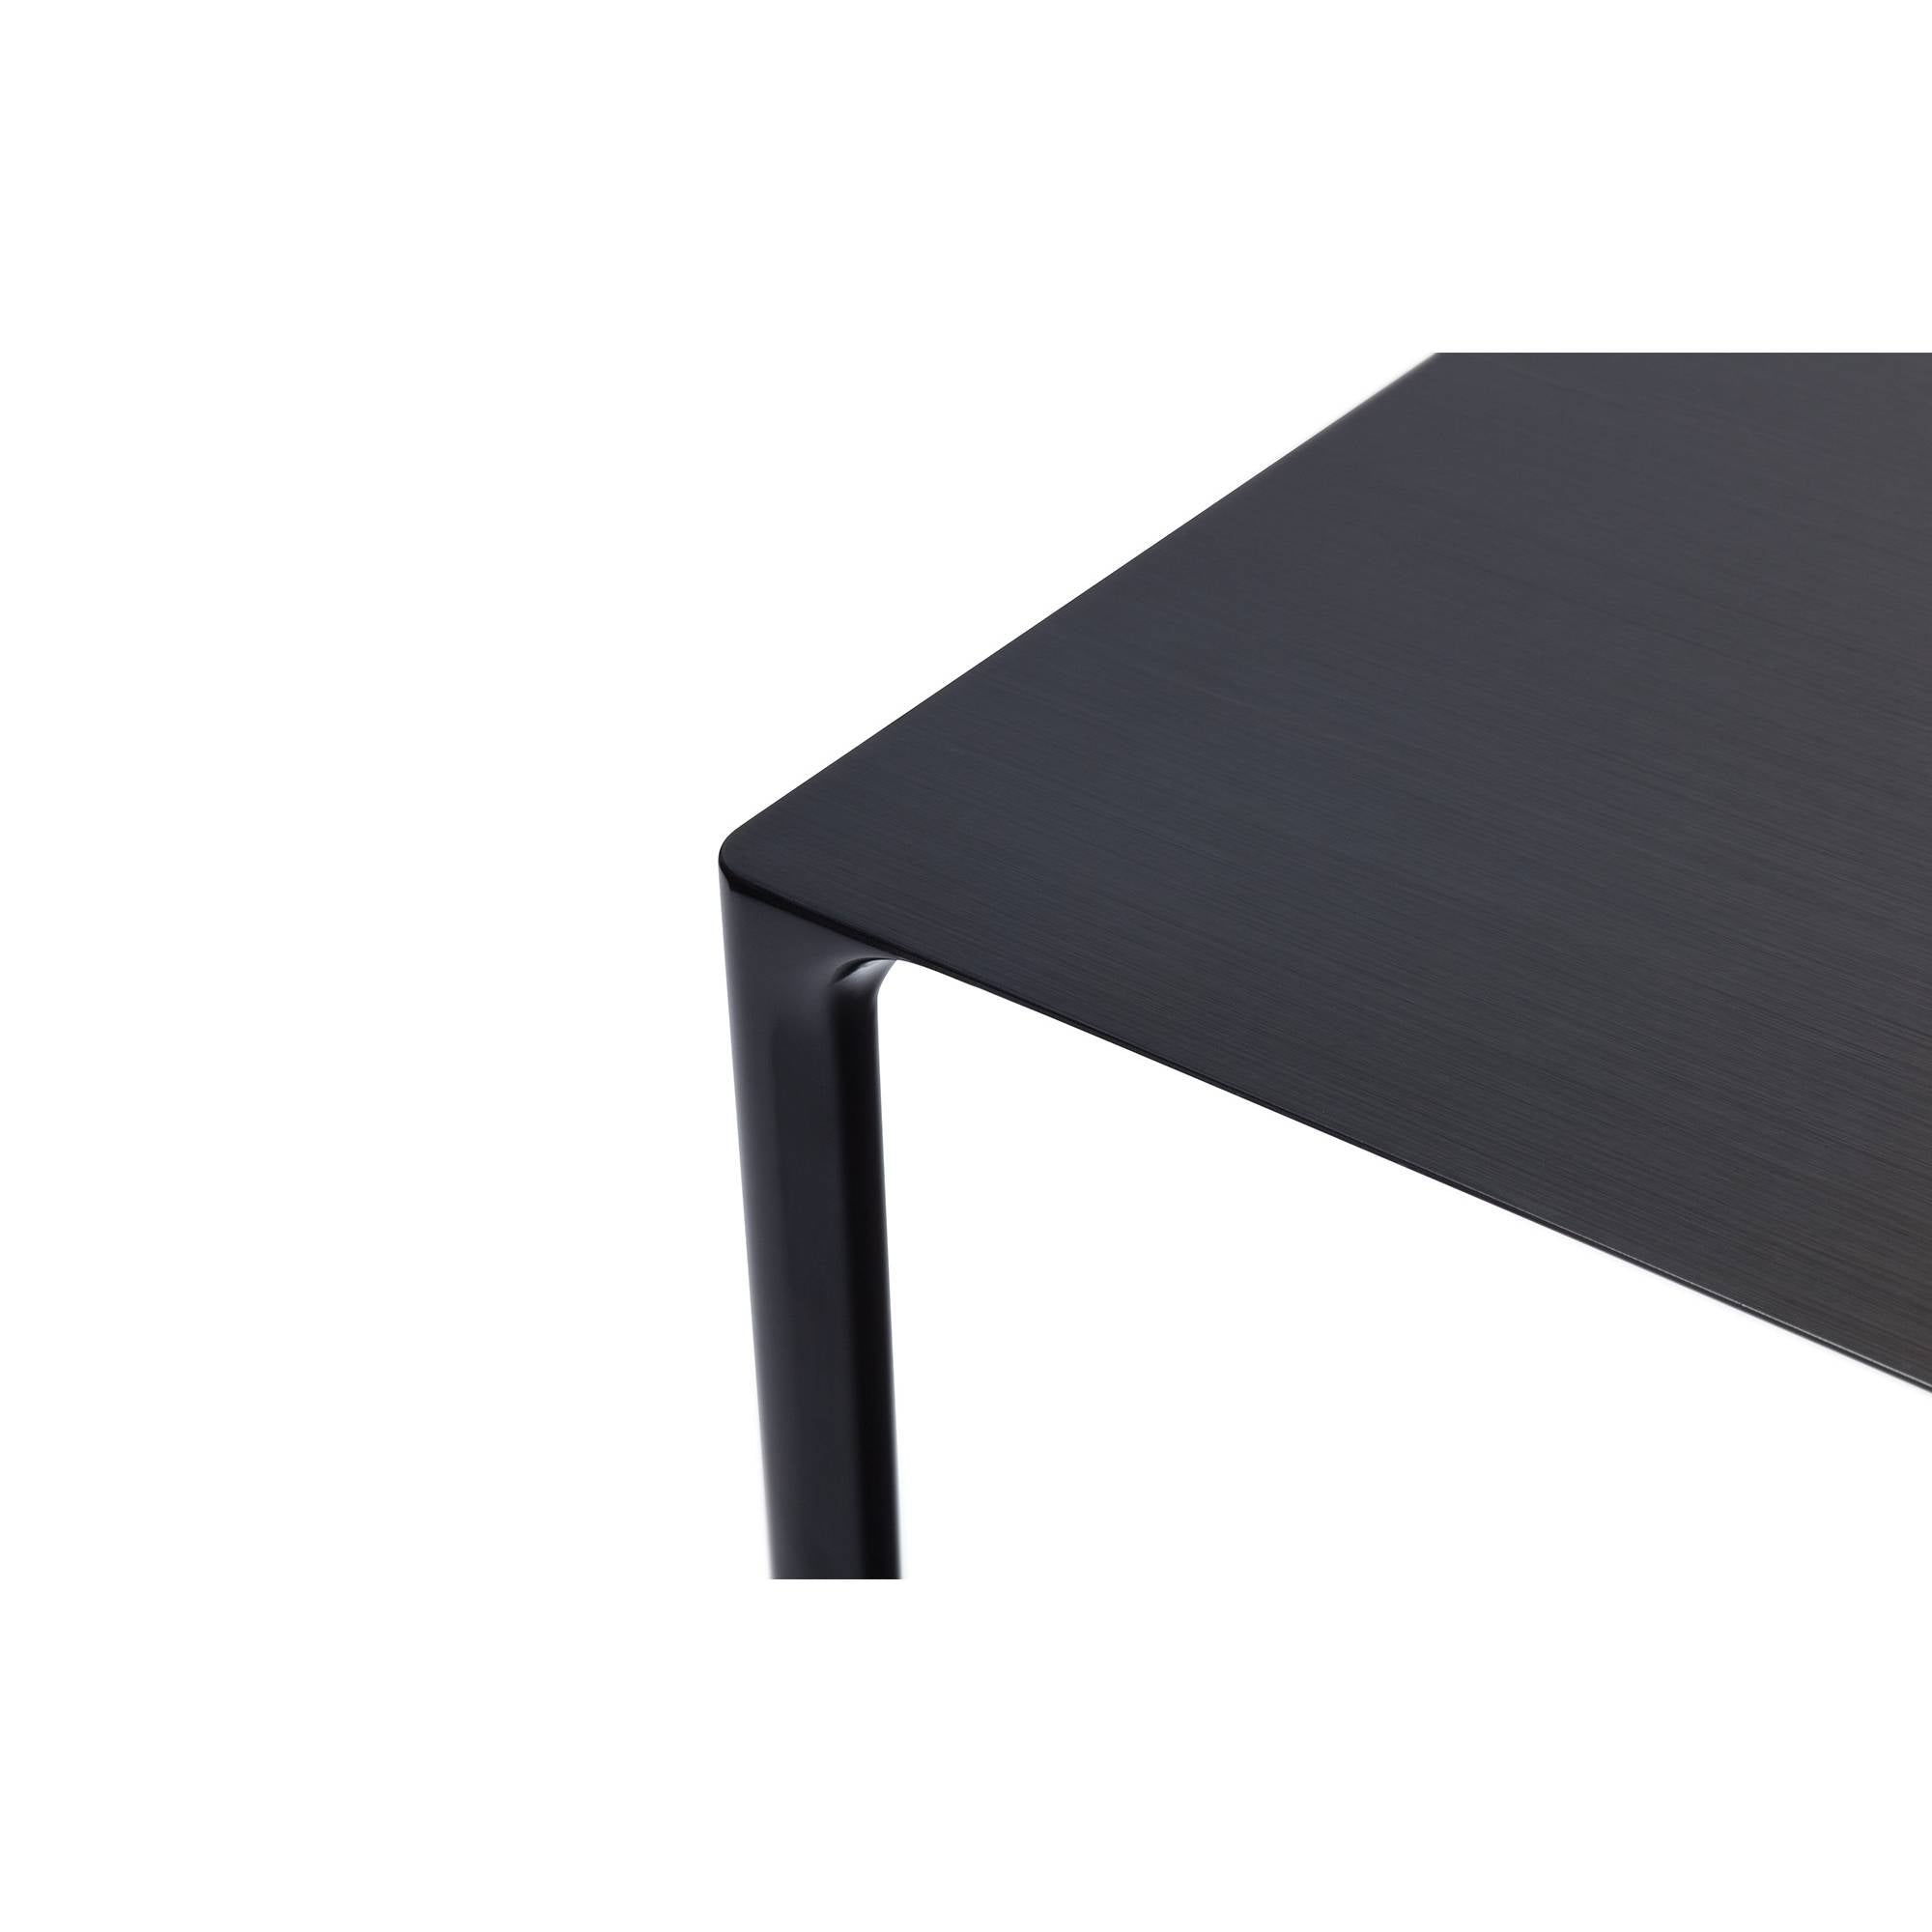 Surface Dining Table